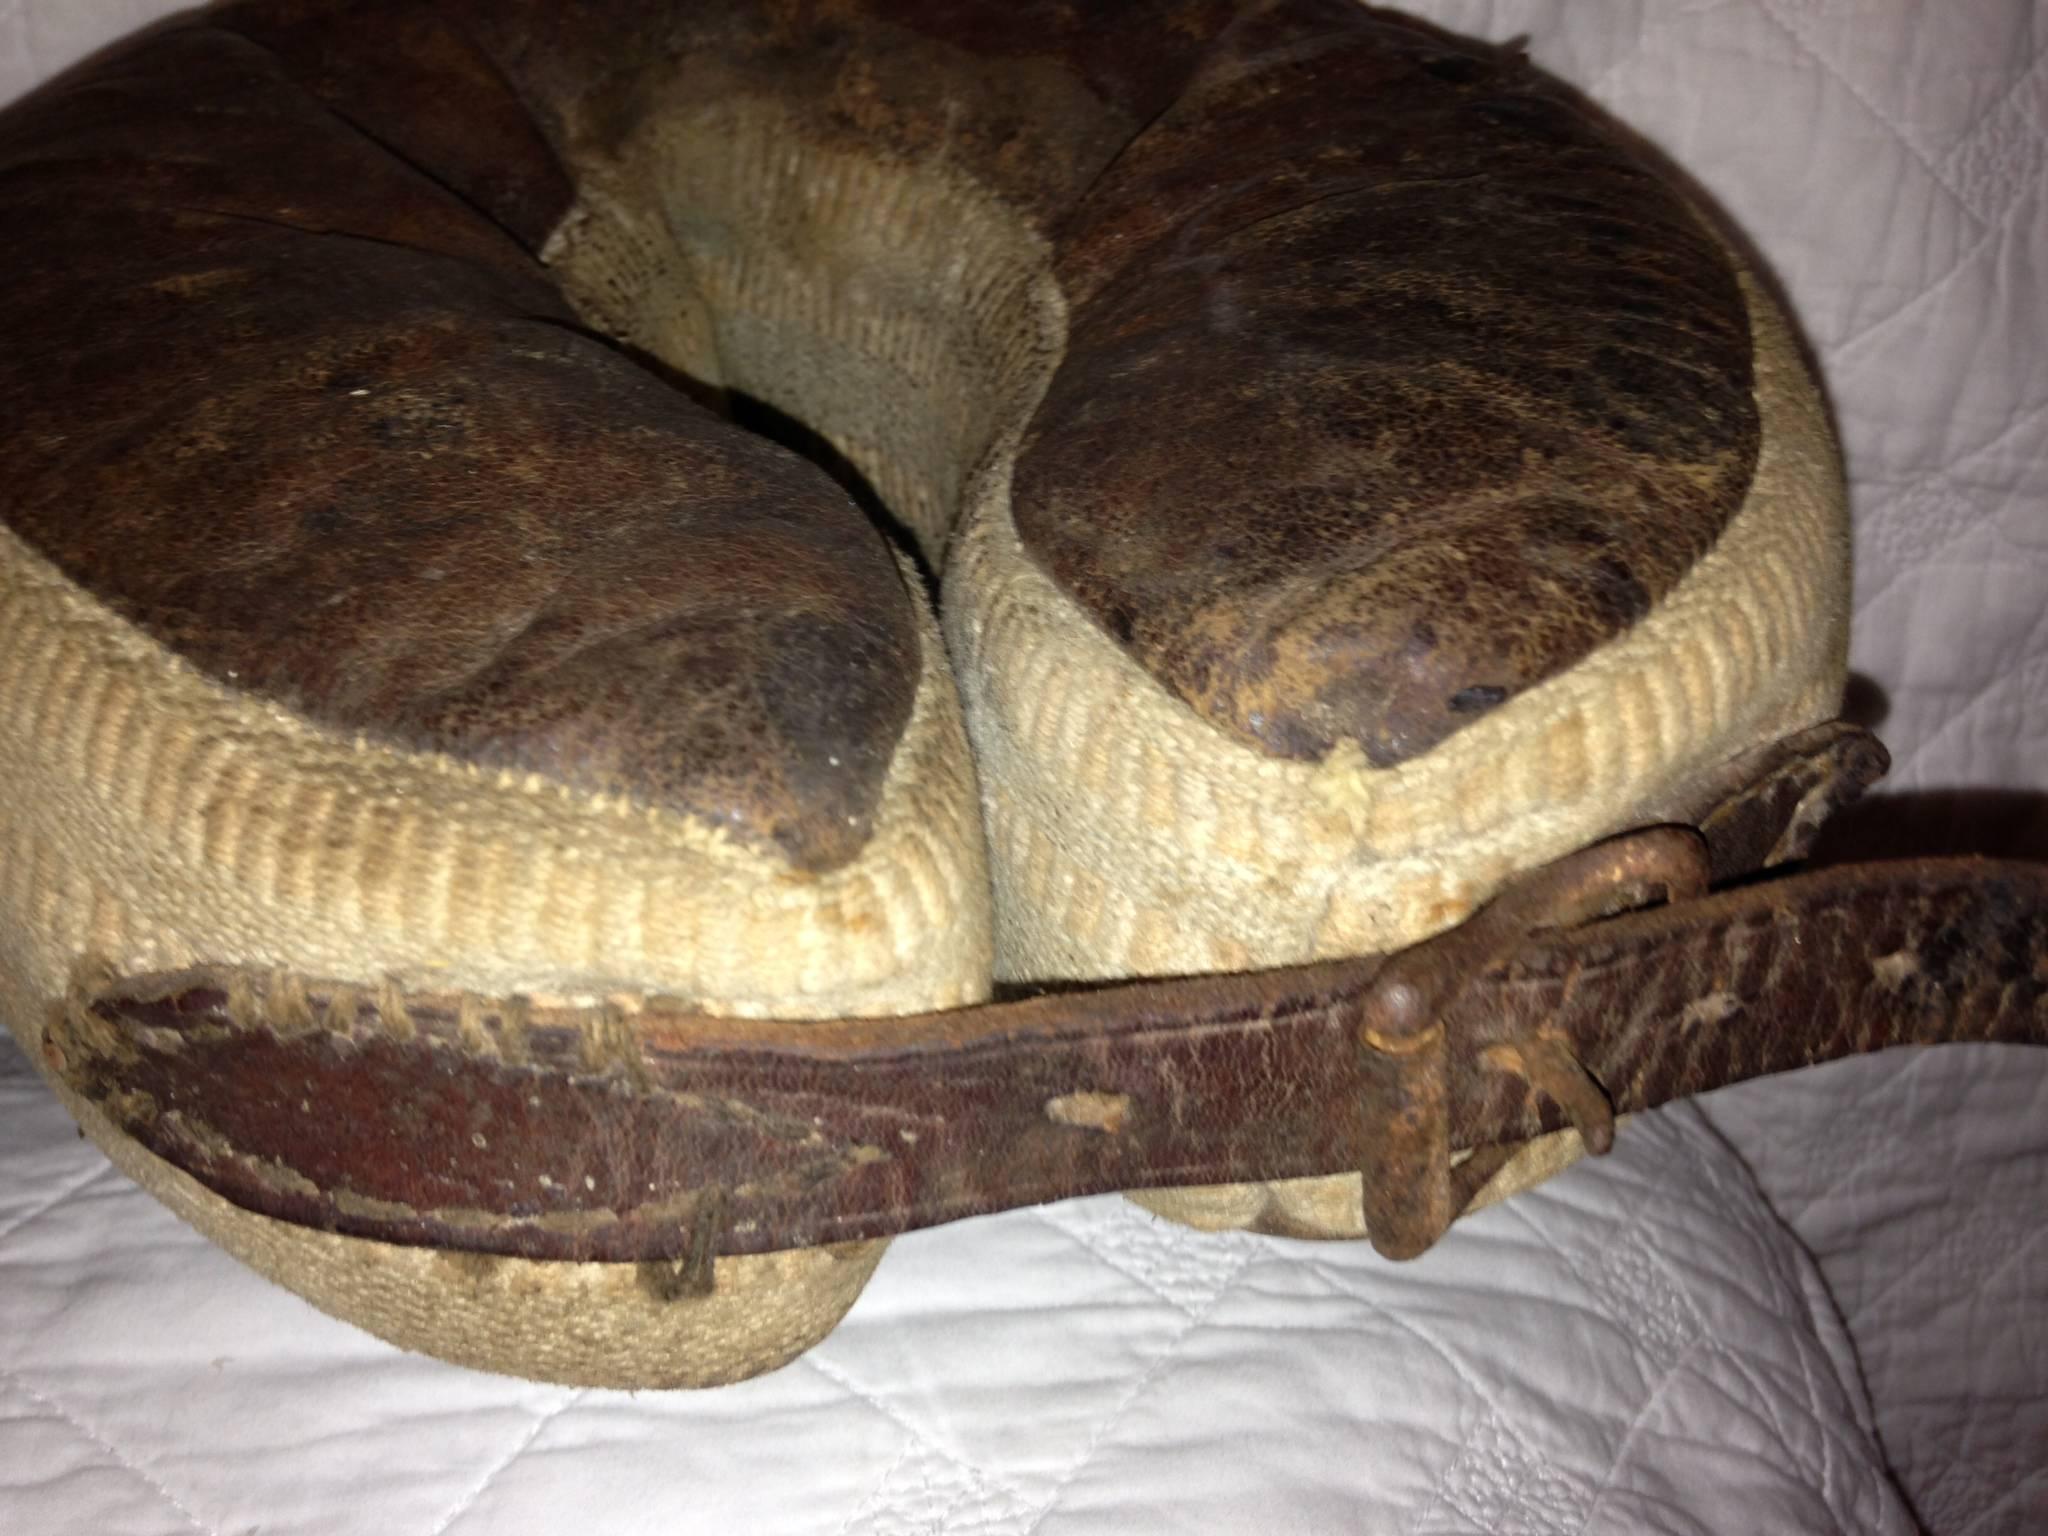 Pair of late1880s leg protectors for race horses. Prevented bruising or agitating of the horse's legs while lying in its stall. Made of leather and canvas. A horse lover's dream artifact. Extremely rare.